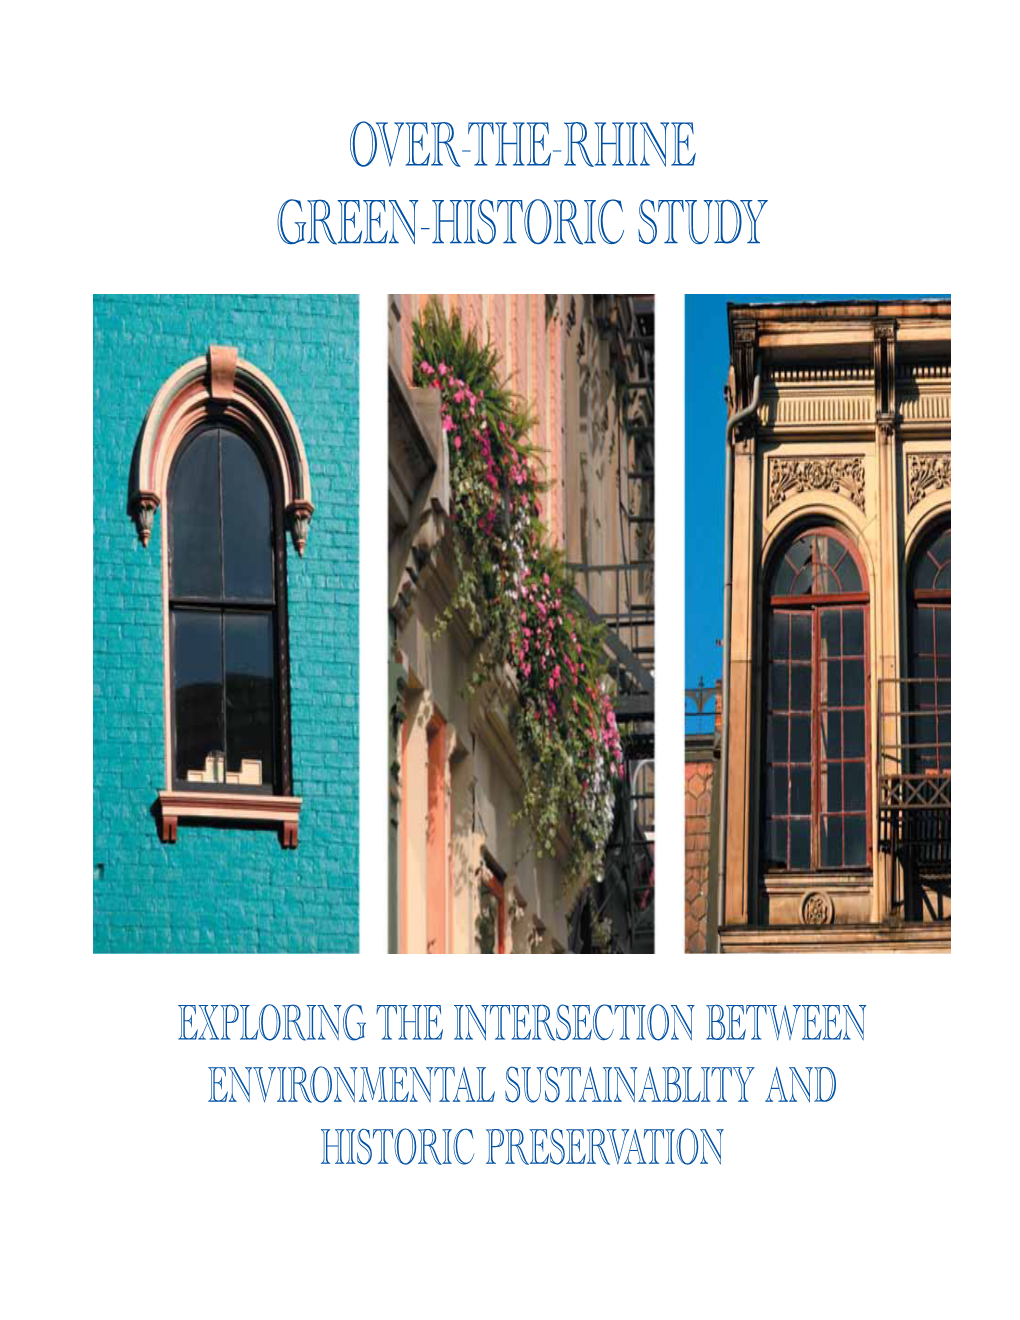 Over-The-Rhine Green-Historic Study